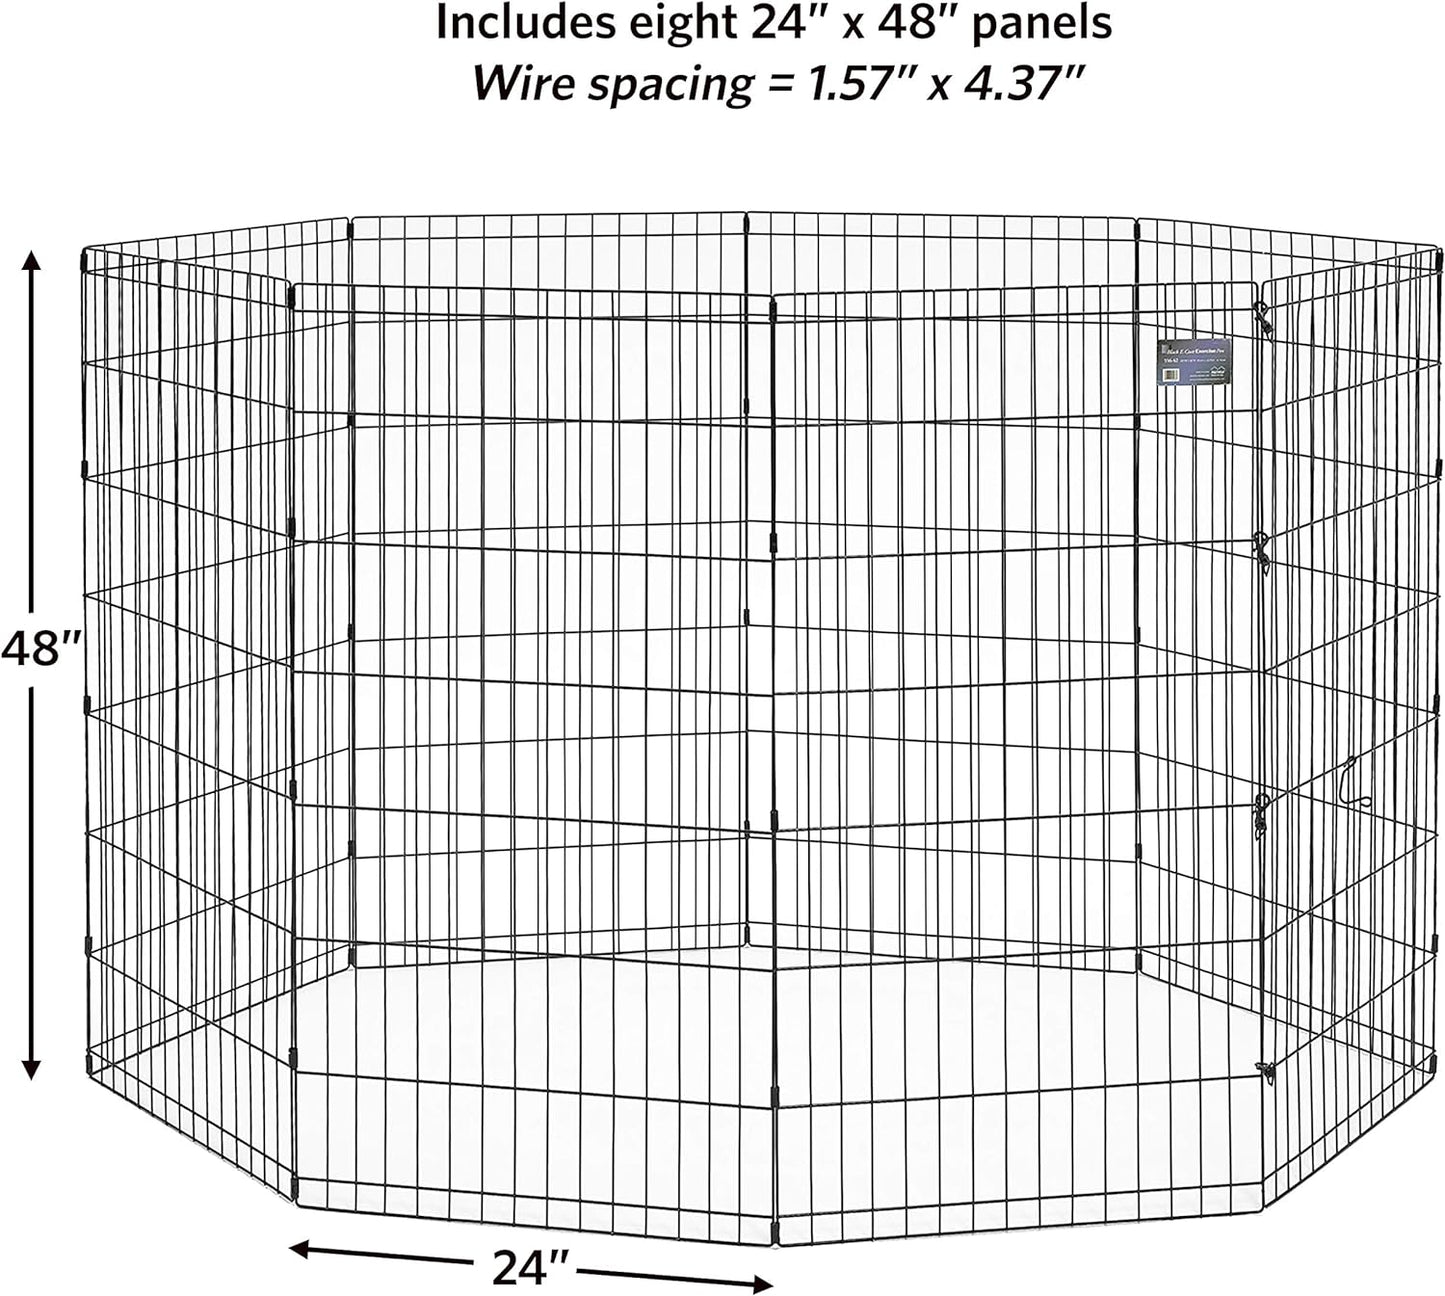 MidWest Homes for Pets Foldable Metal Dog Exercise Pen / Pet Playpen, 48'H x 24'W